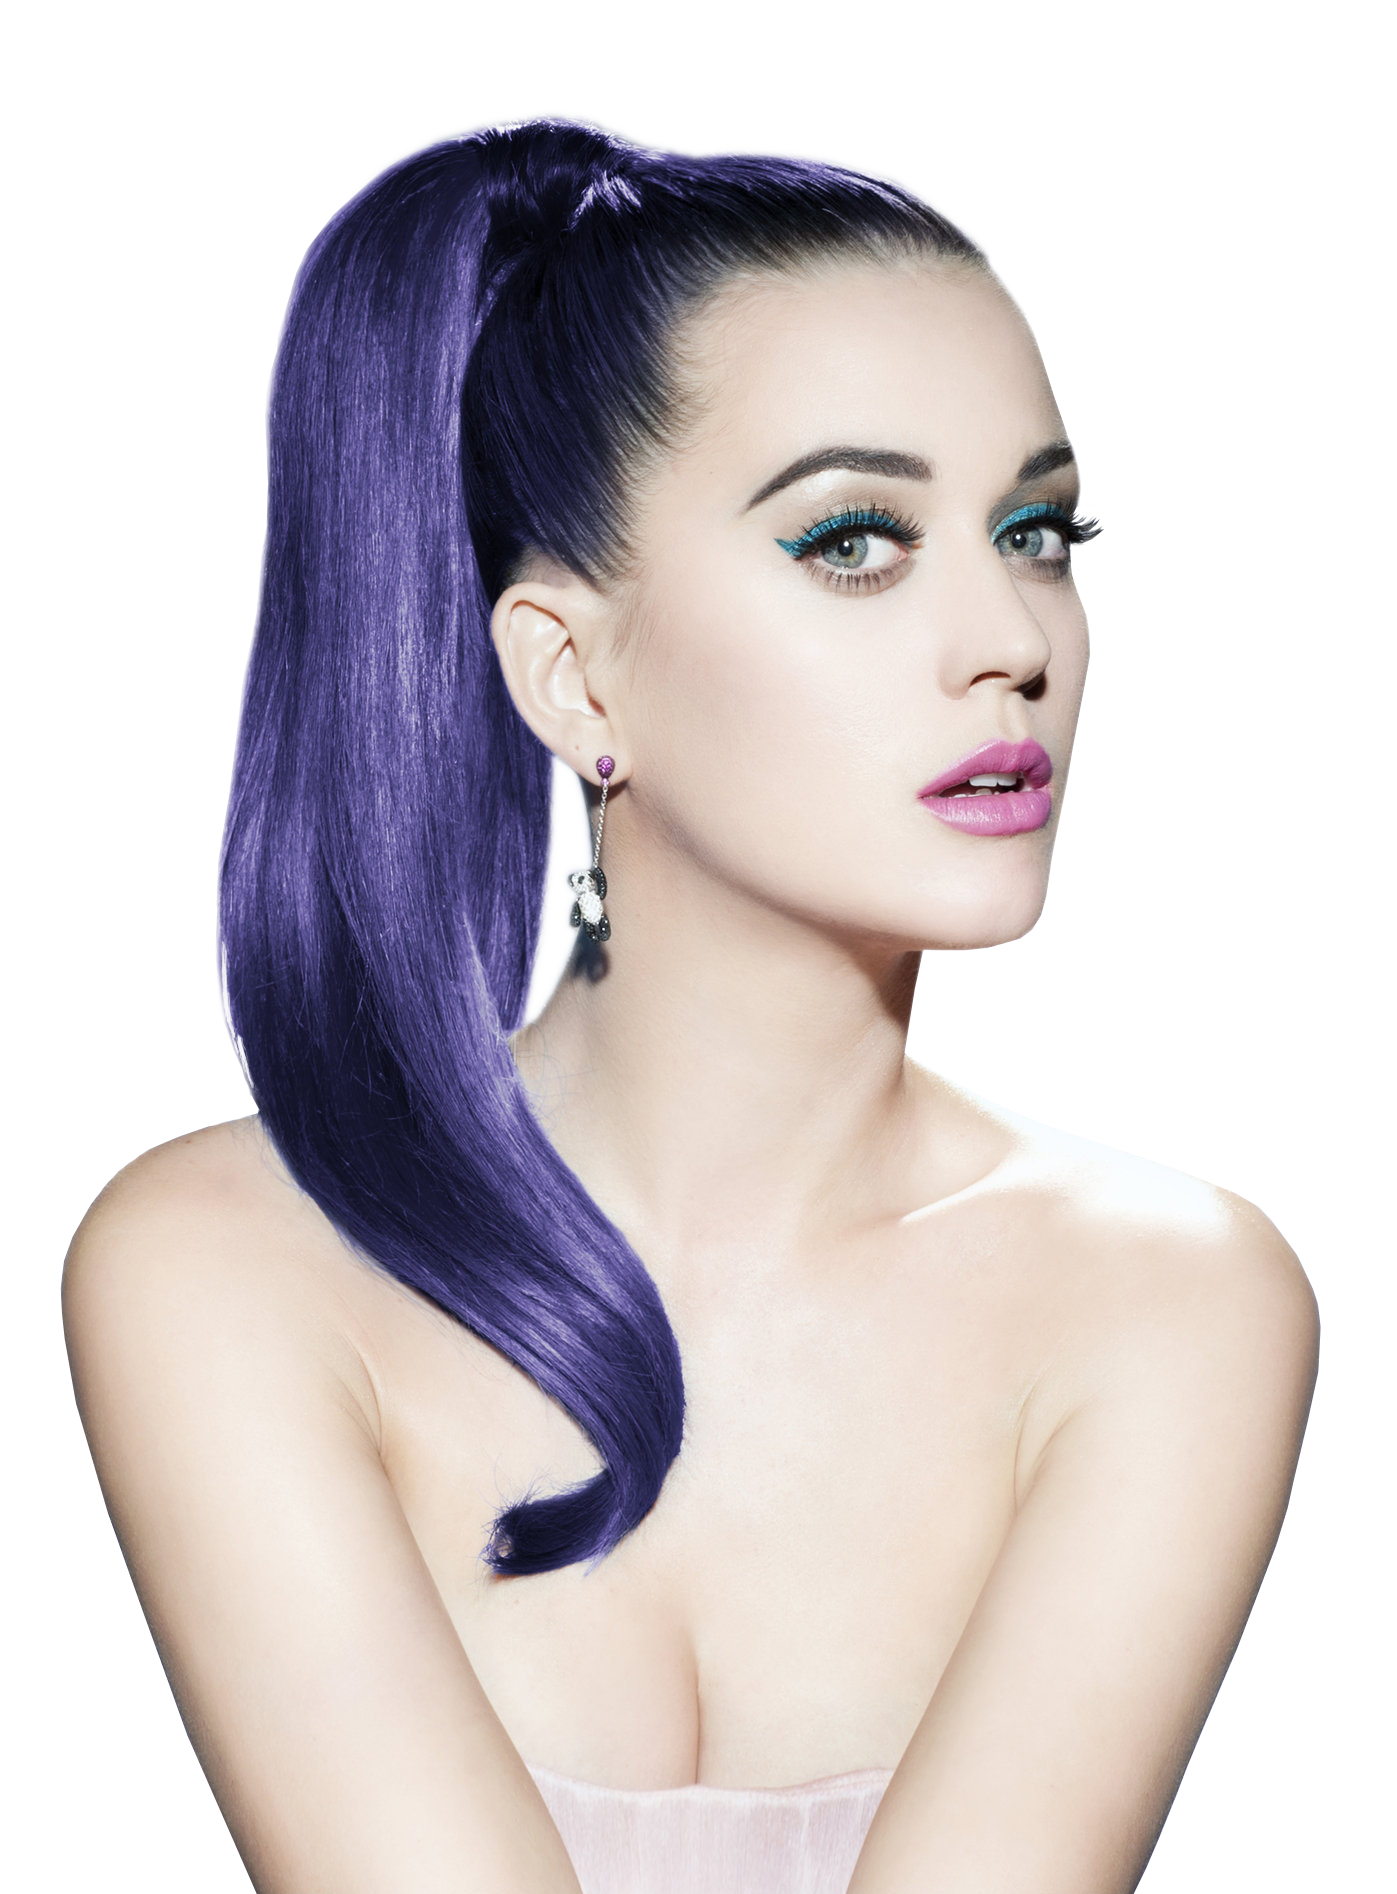 Katy Perry Download Free Image PNG Image